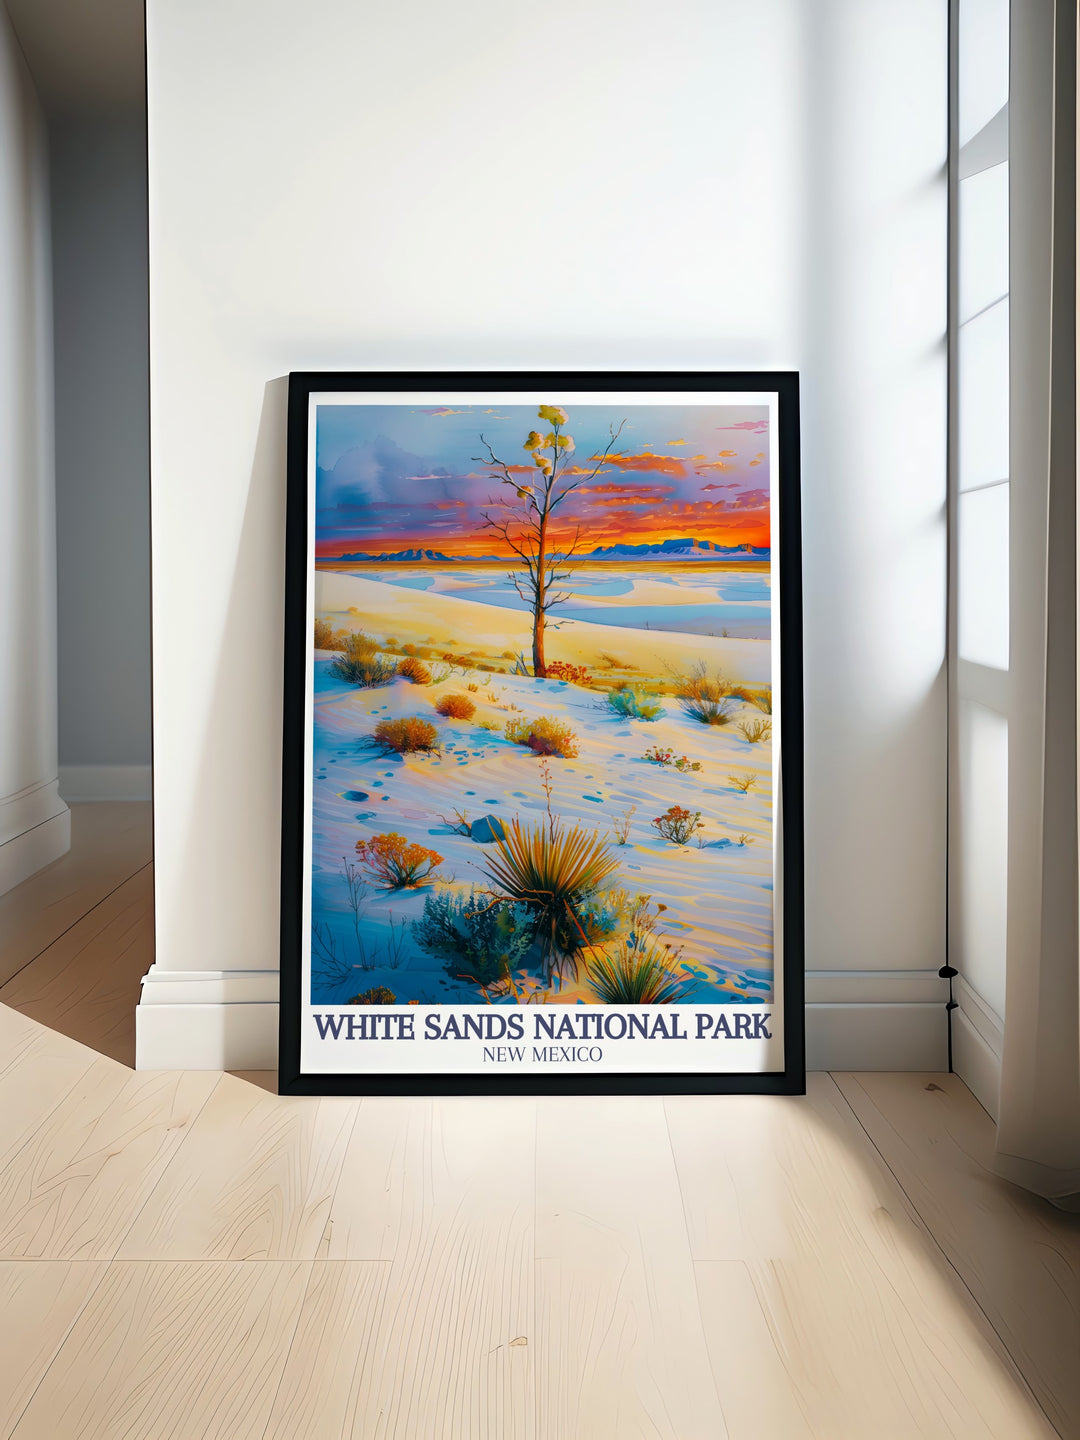 White Sands National Park art print featuring the stunning San Andres Mountains and the beautiful Chihuahuan Desert perfect for adding elegant home decor and capturing the serene beauty of nature ideal for living room wall decor and travel enthusiasts.